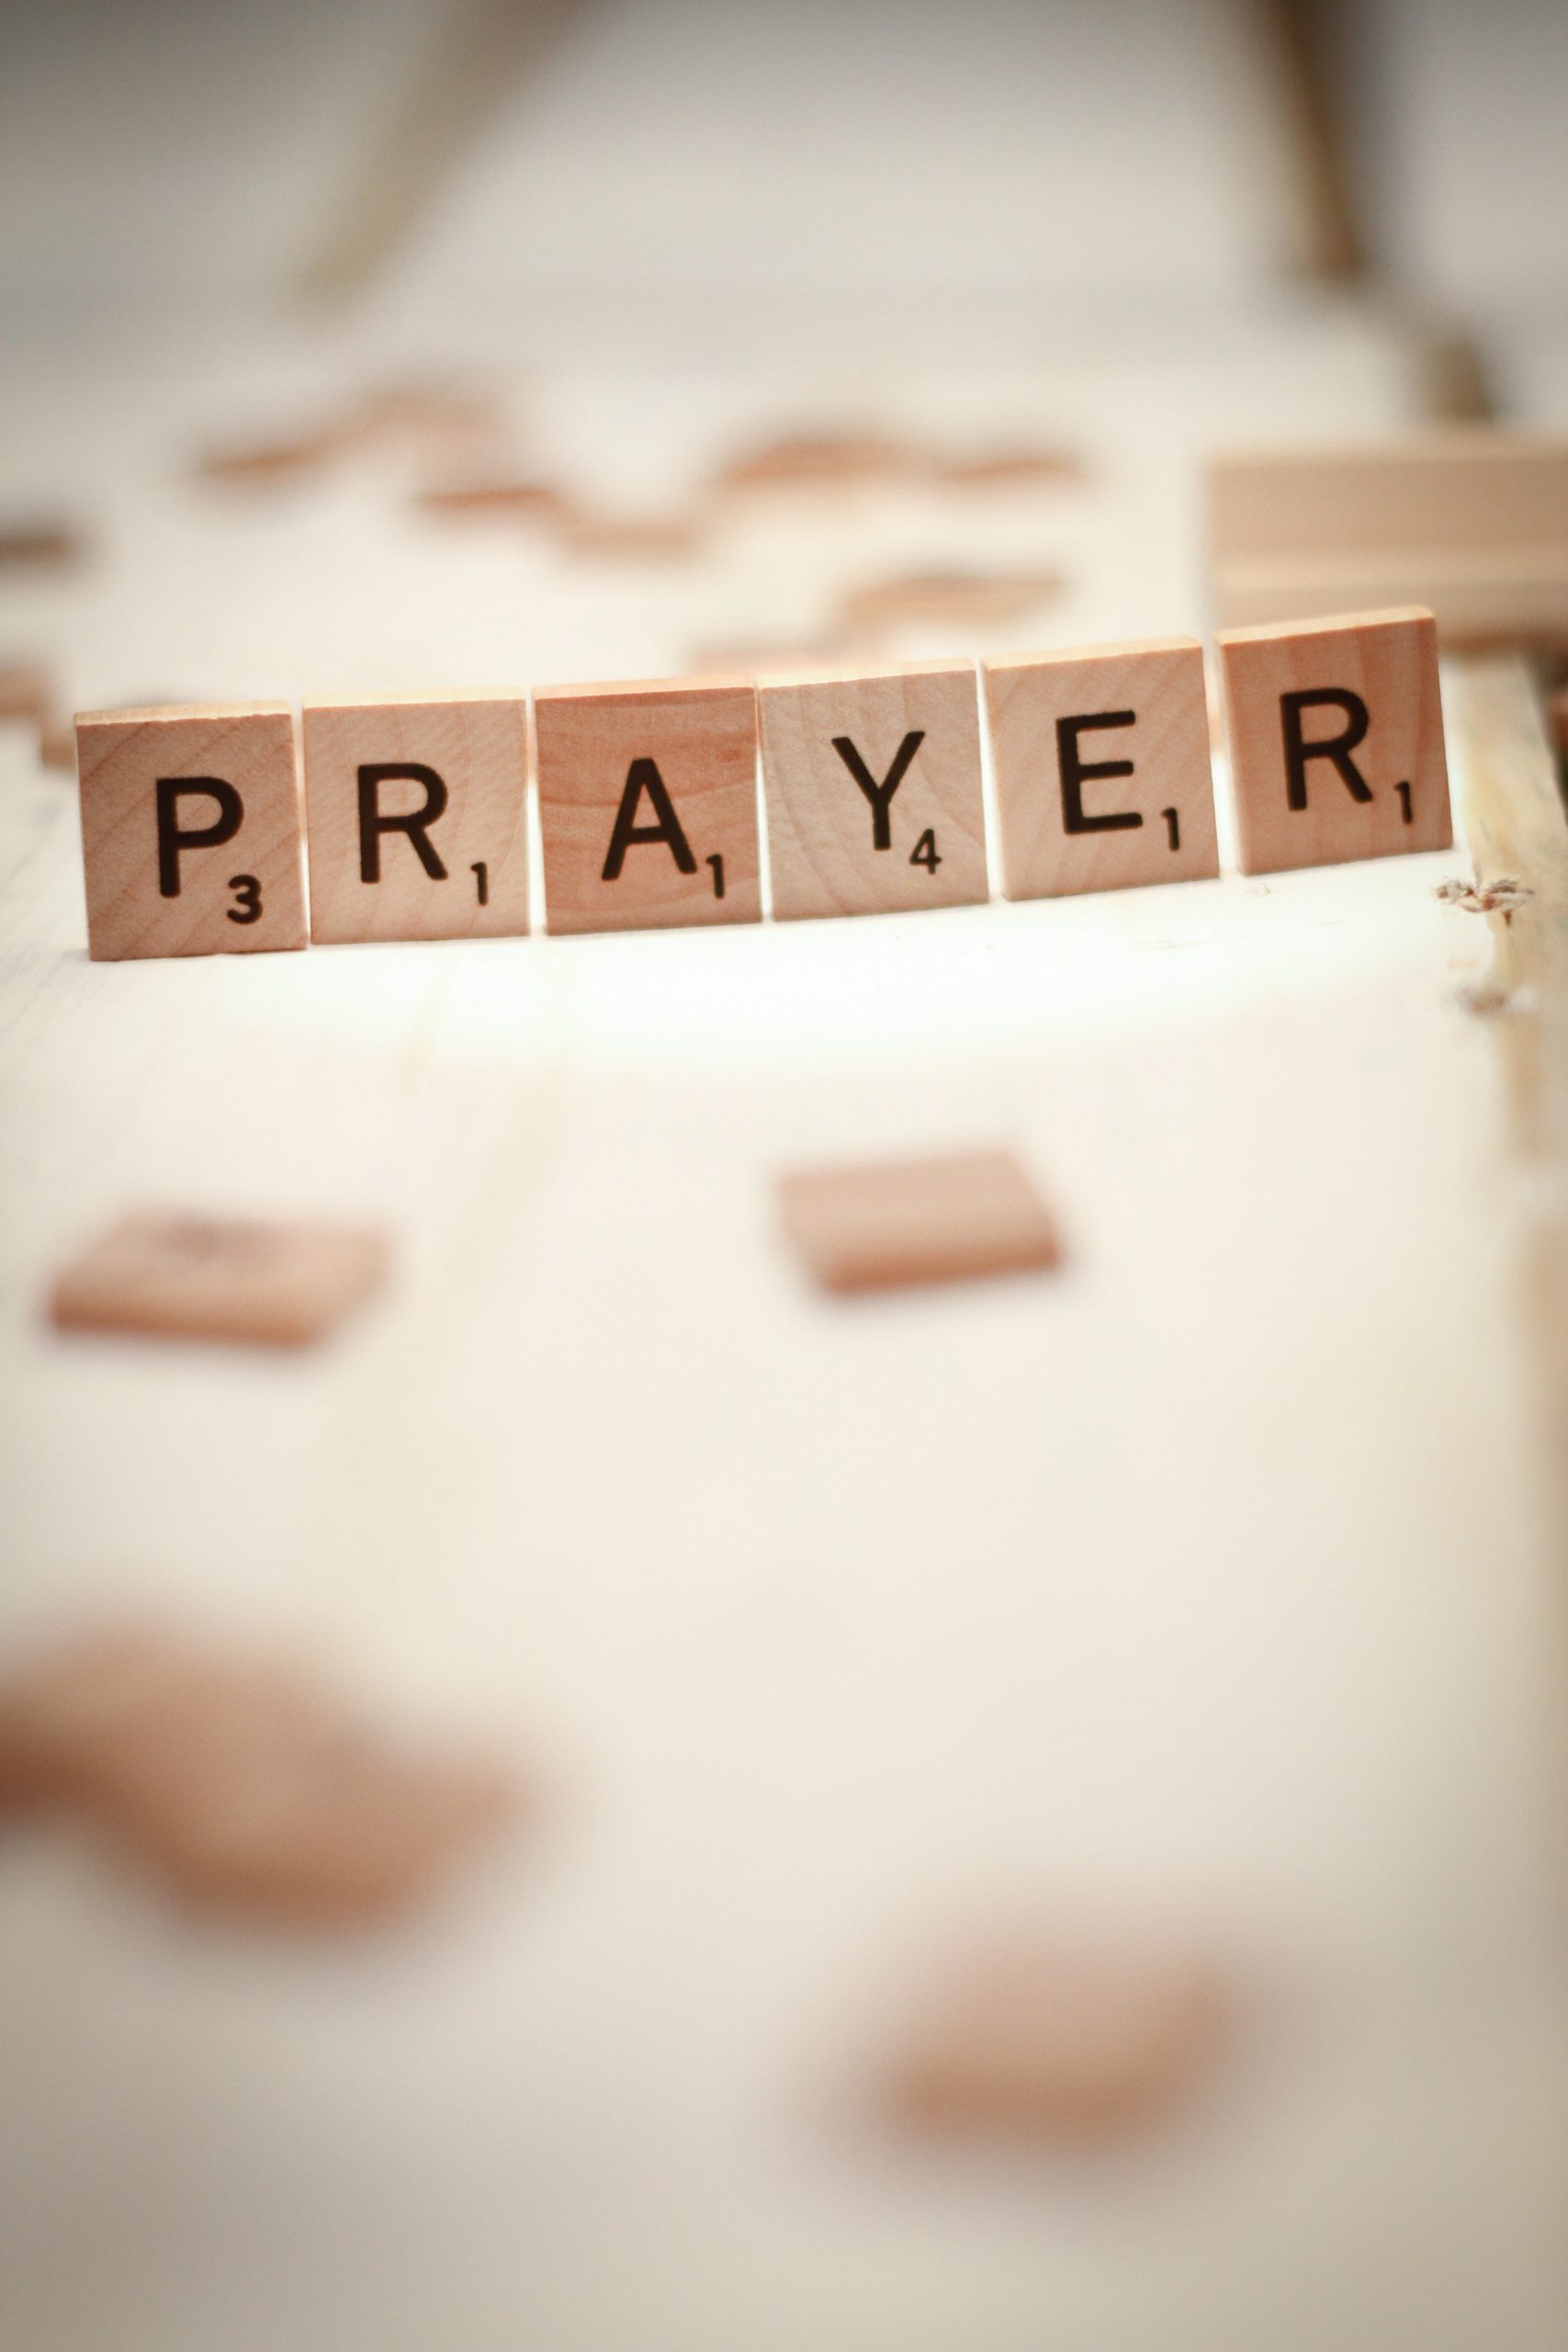 Send us your prayer request today